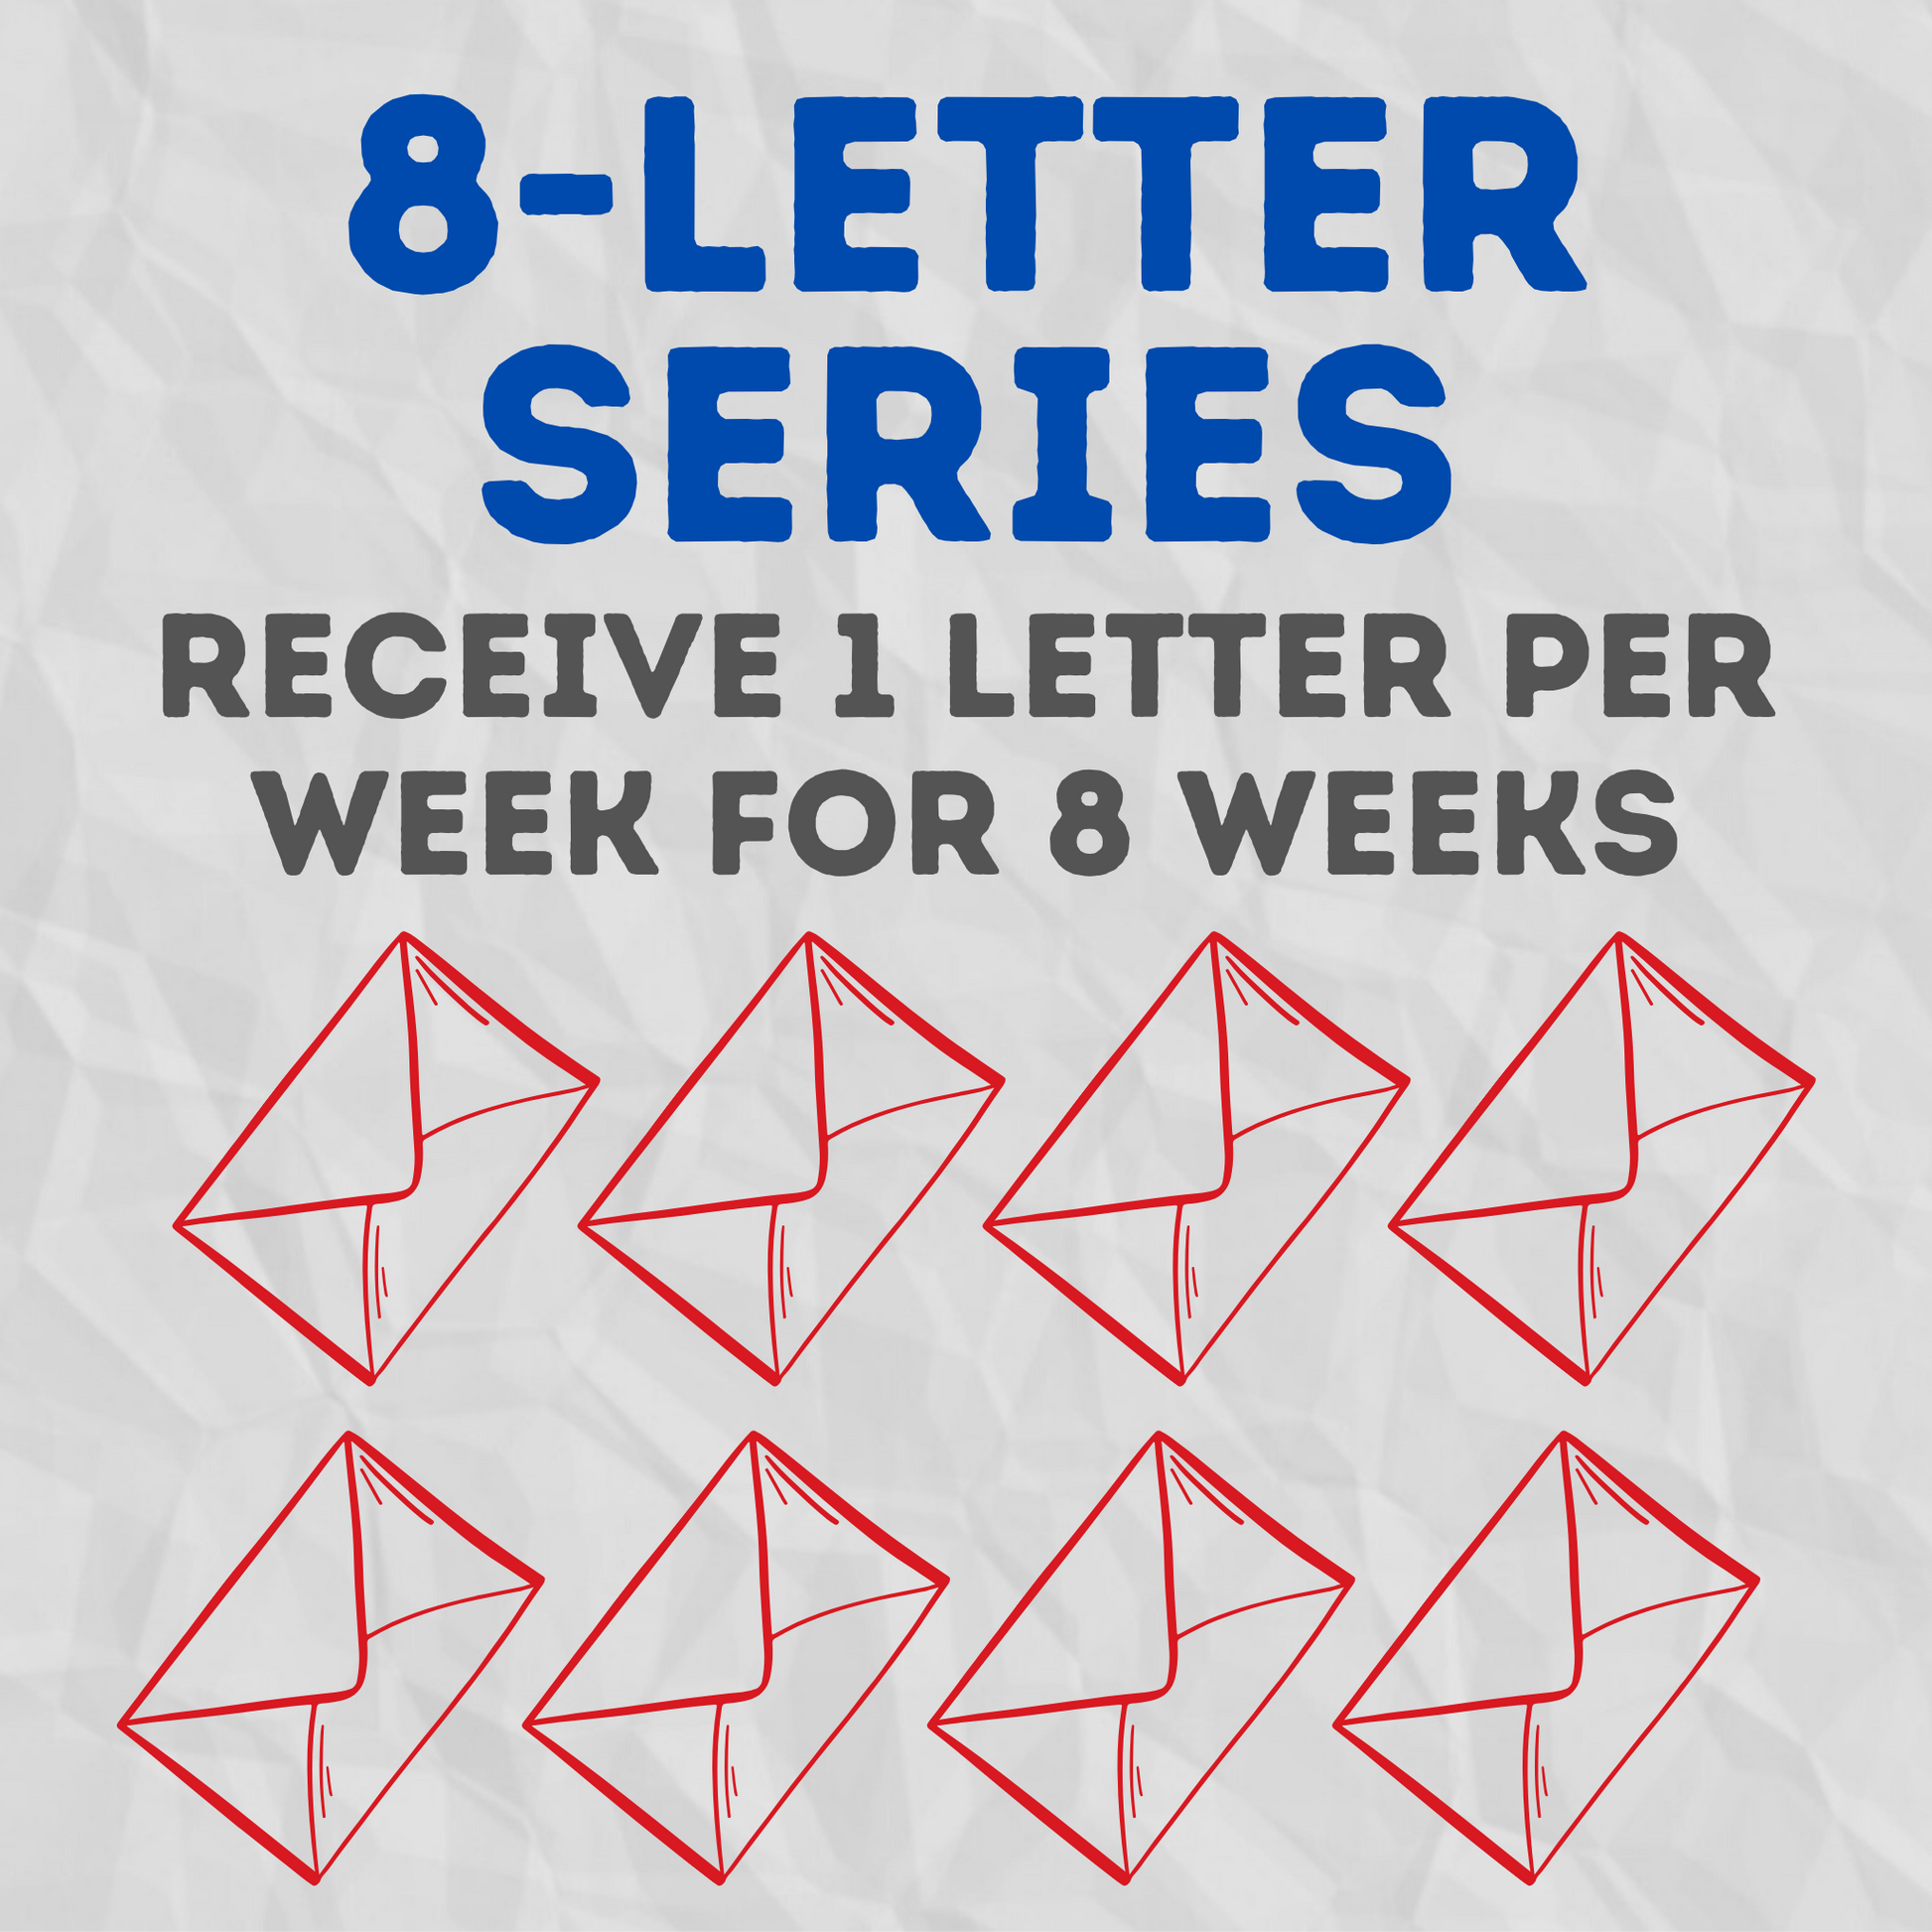 Fiction Mail 8-Letter Series - get one weekly letter over two months from a fictional friend who has an amazing story to tell you.